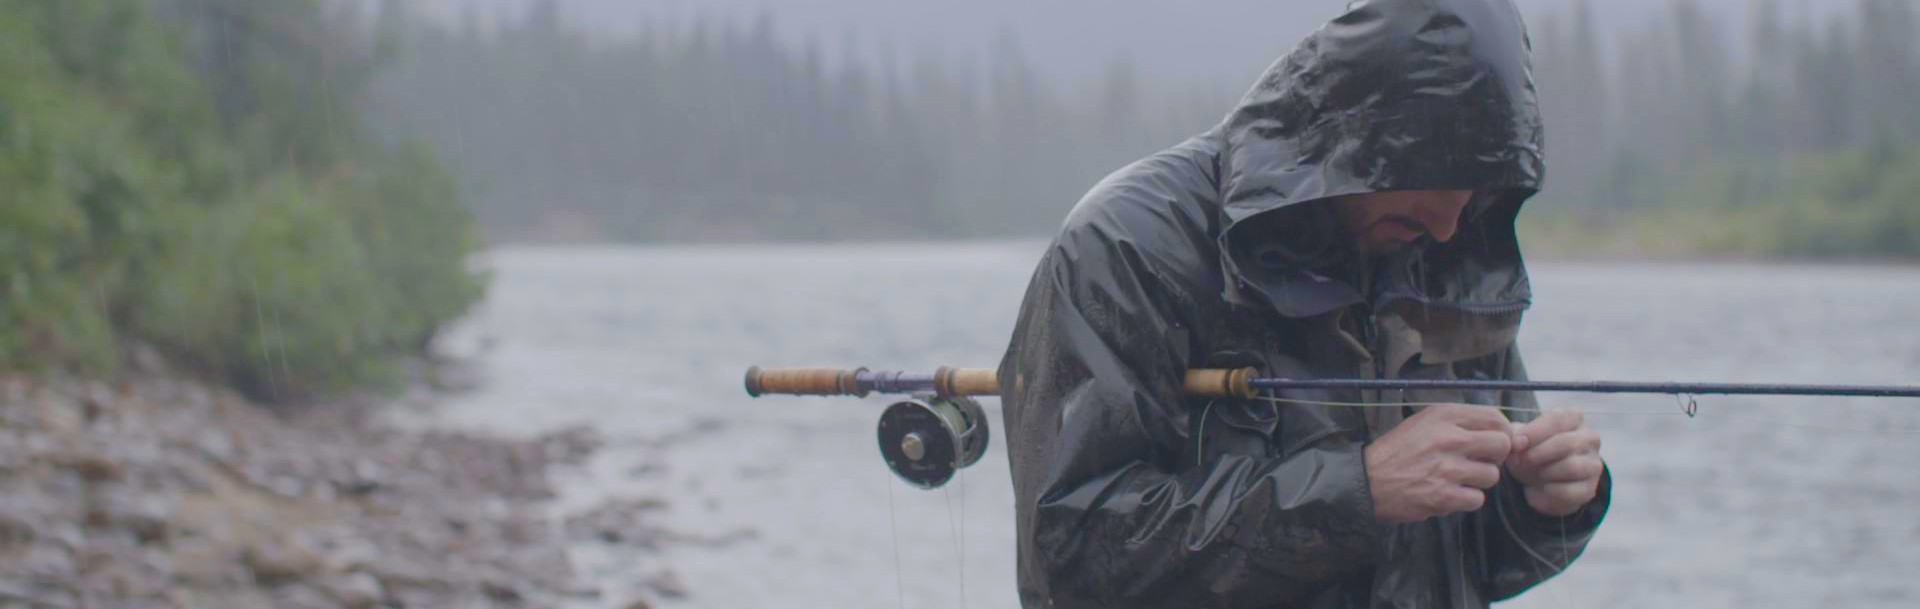 A man in the rain tying a fly to his rod